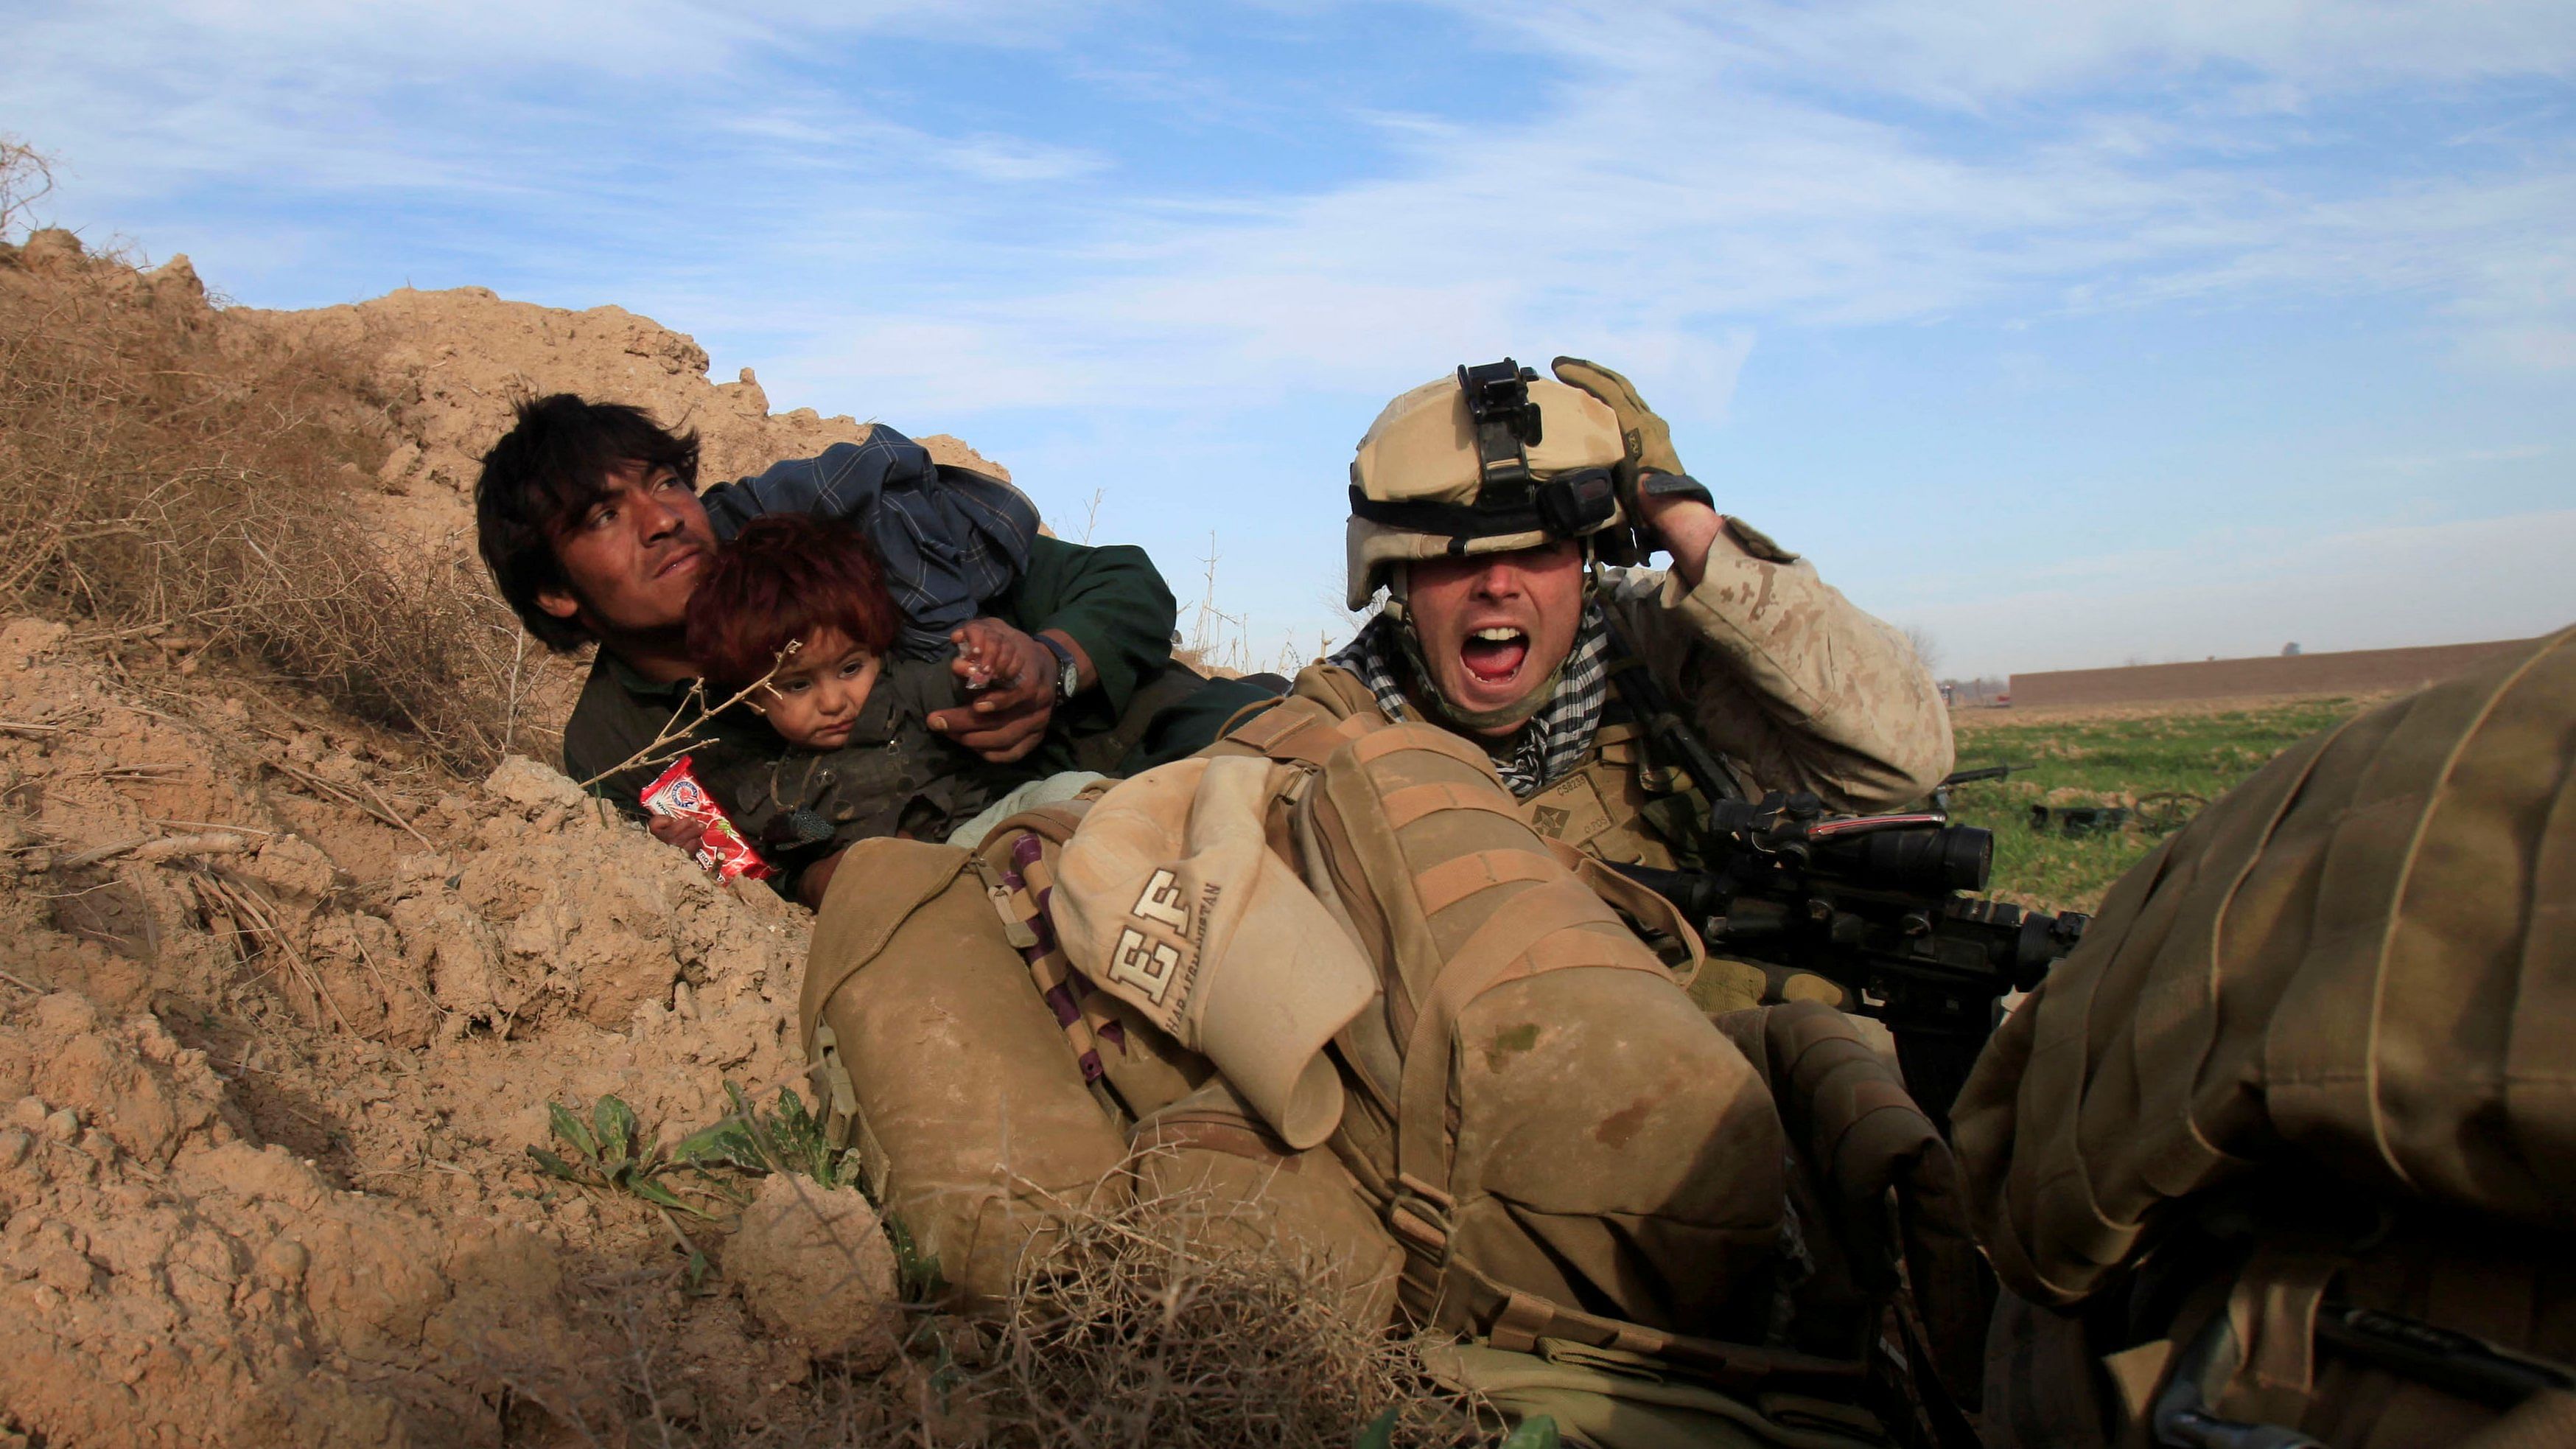 US Marine Lance Corporal Chris Sanderson, 24, from Flemington, New Jersey shouts as he tries to protect an Afghan man and his child after Taliban fighters opened fire in the town of Marjah, in Nad Ali district, Helmand province, Afghanistan February 13, 2010 . Credit: Reuters File Photo